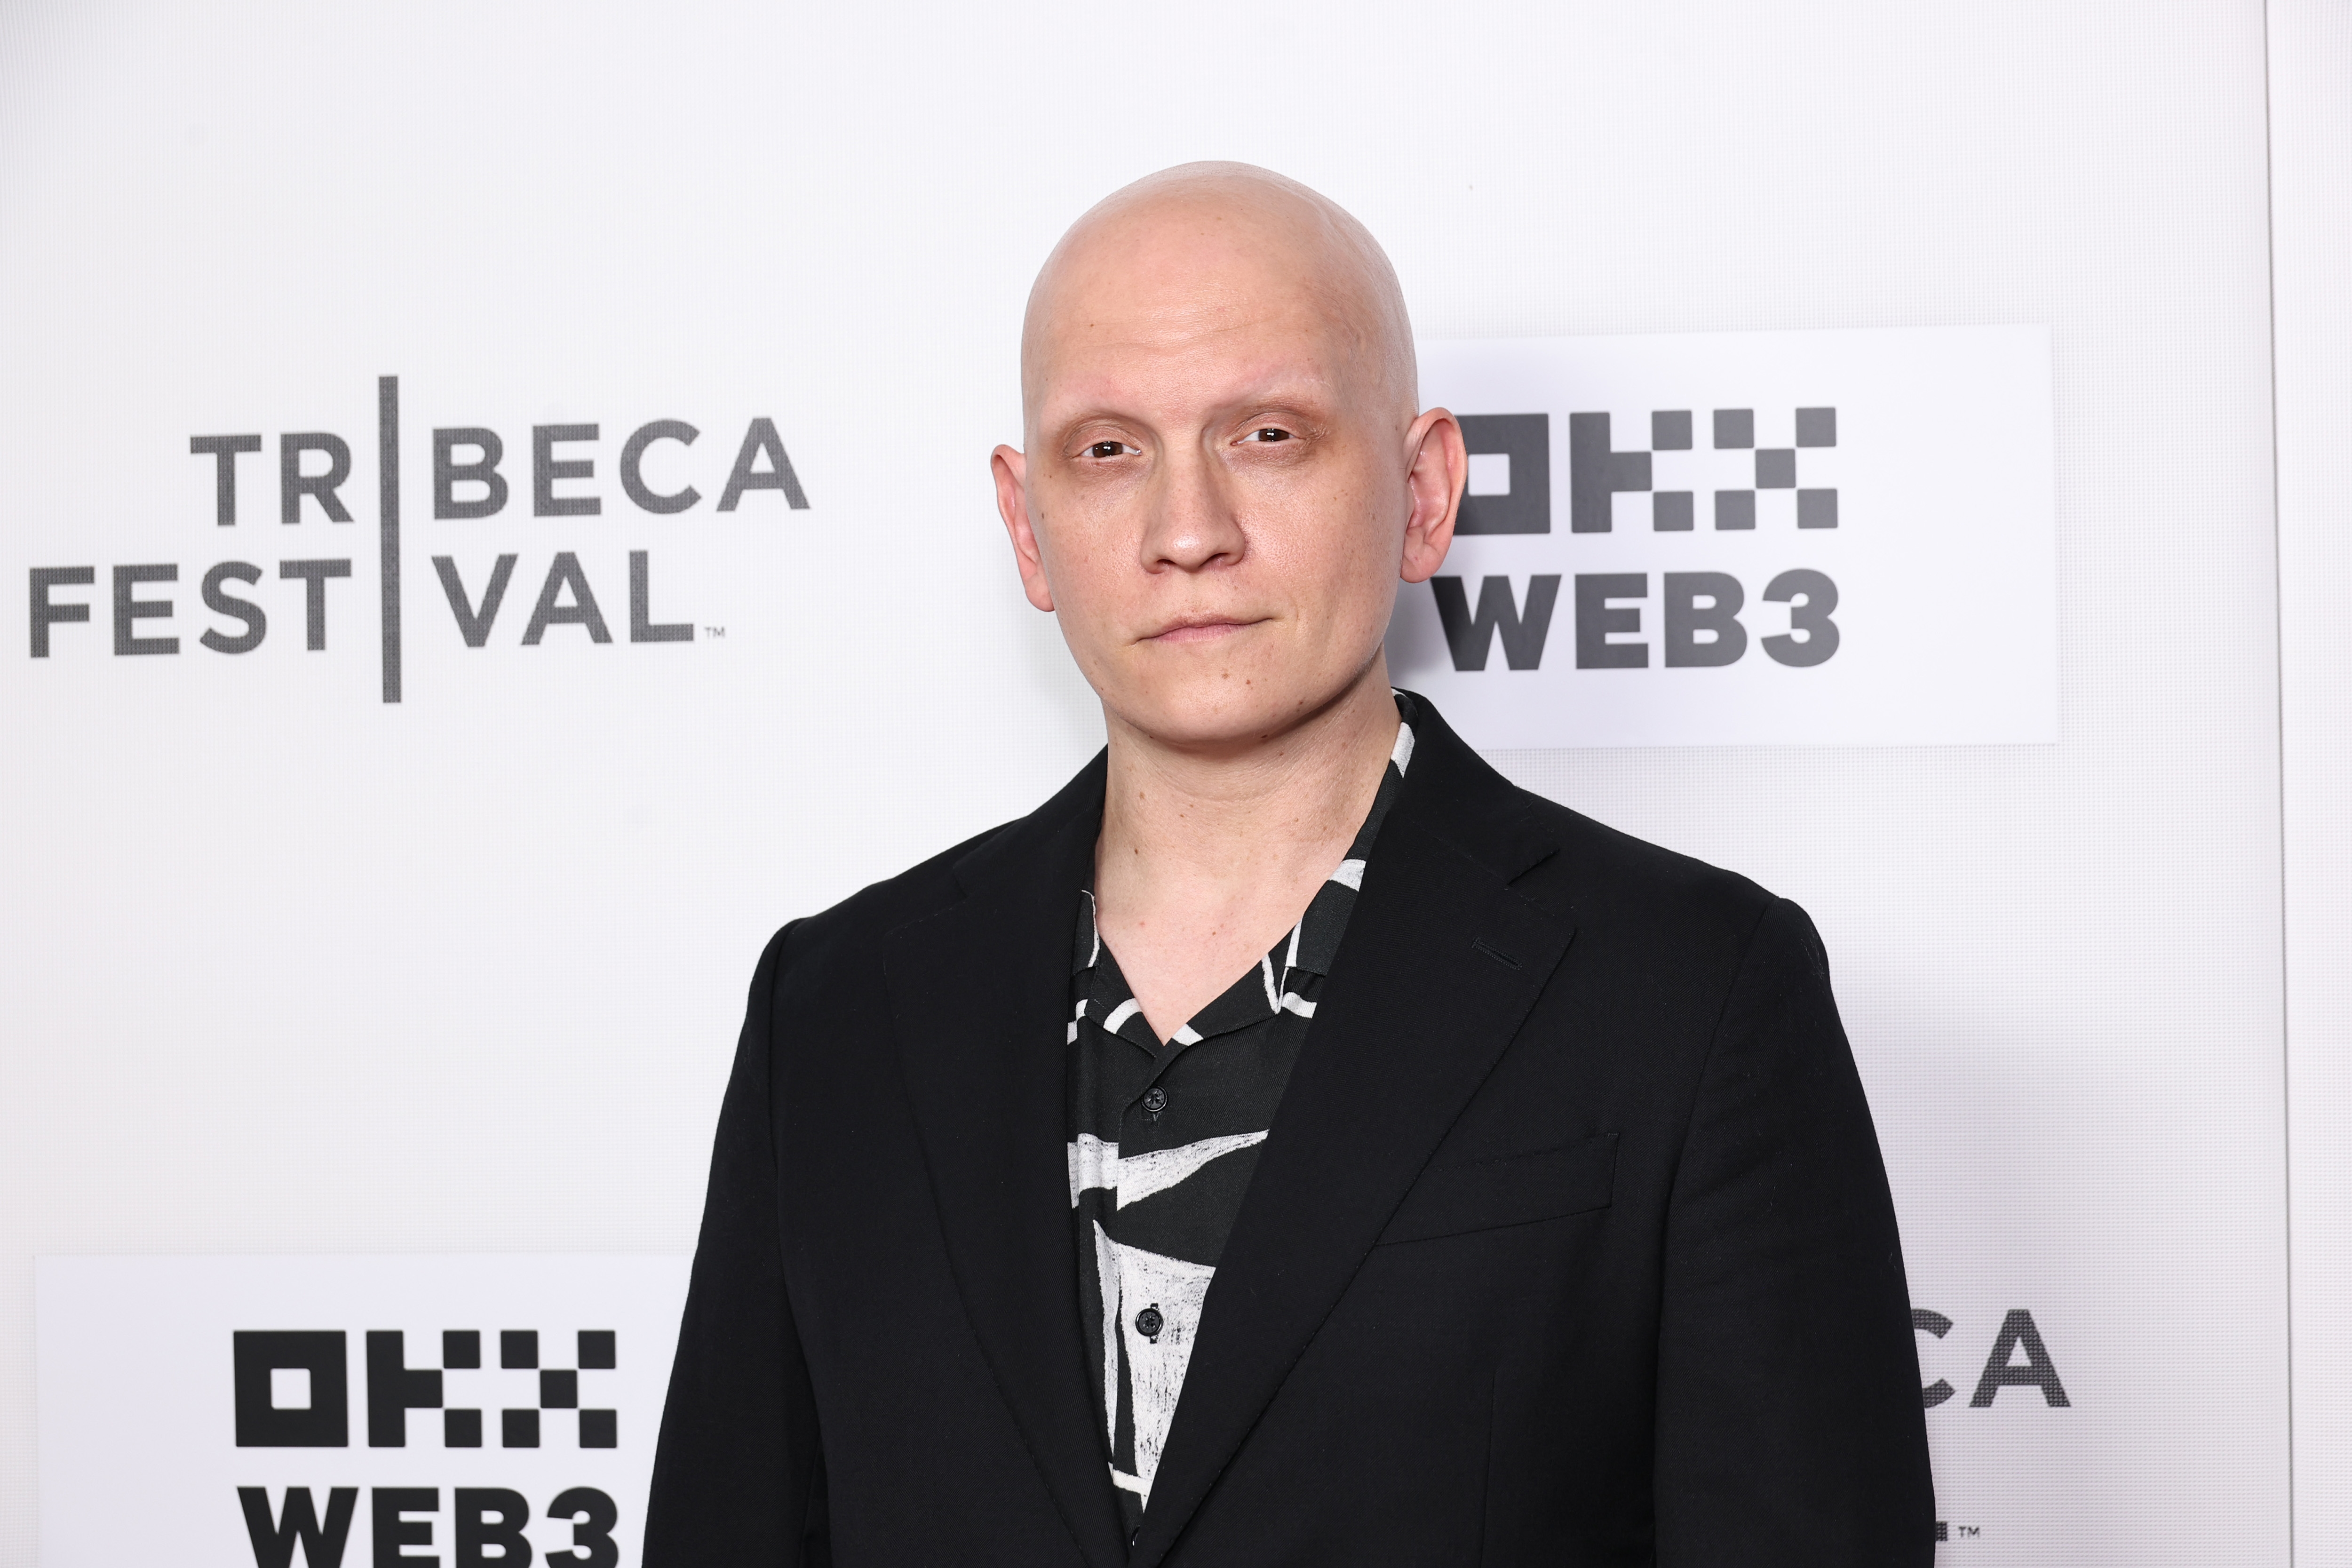 Barry’s Anthony Carrigan joins Twisted Metal’s second season